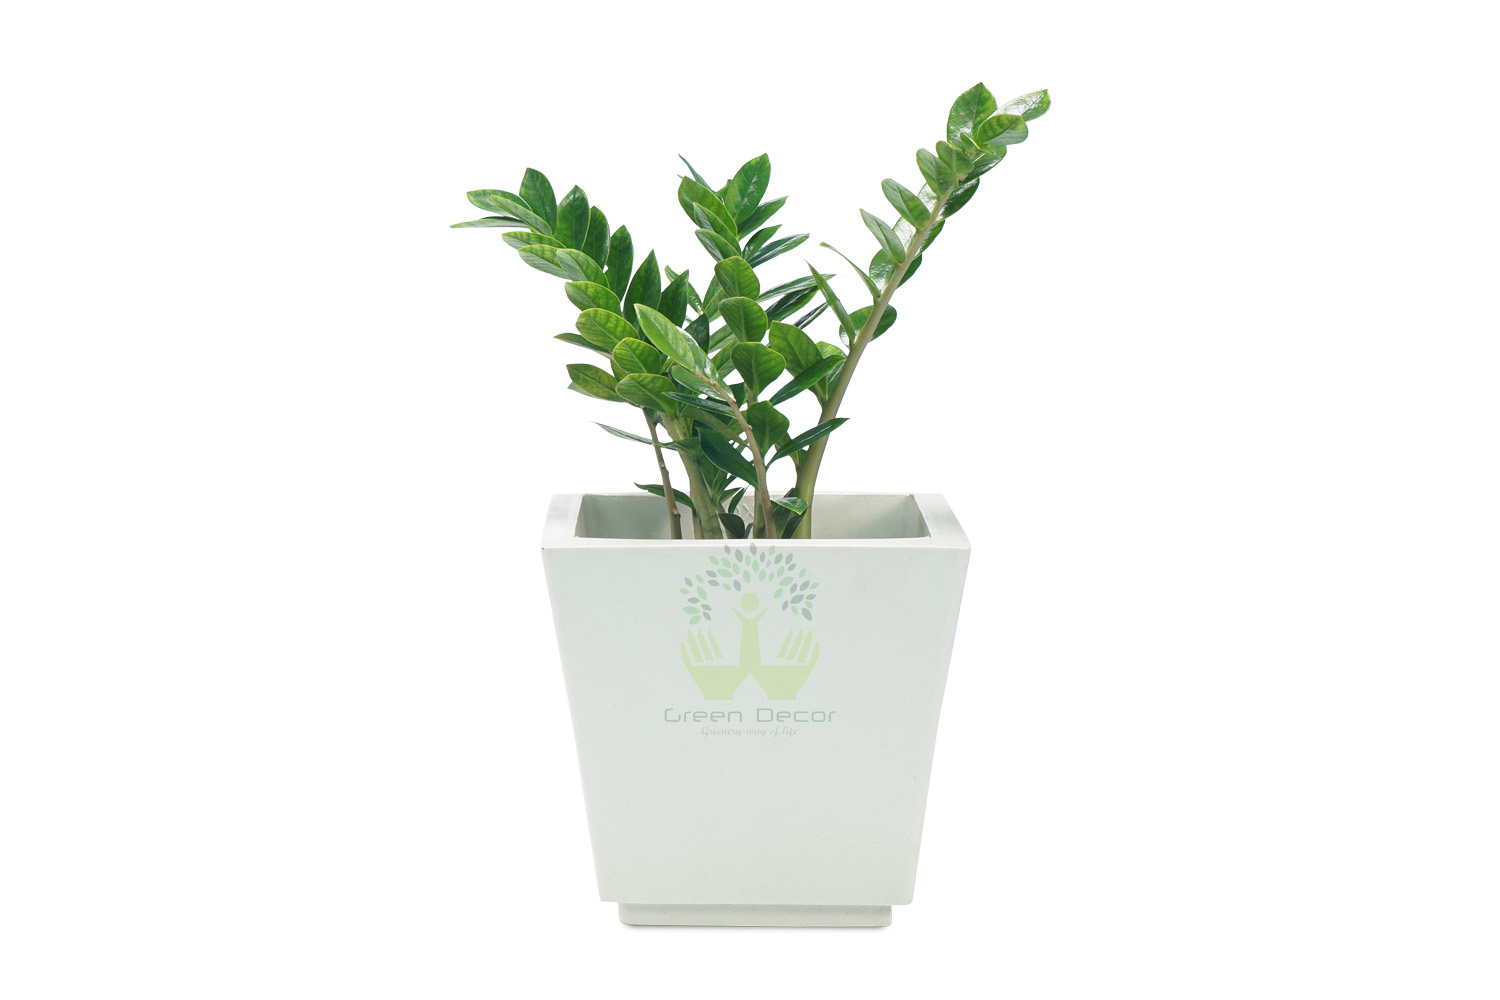 Buy Zed Plants , White Pots and seeds in Delhi NCR by the best online nursery shop Greendecor.